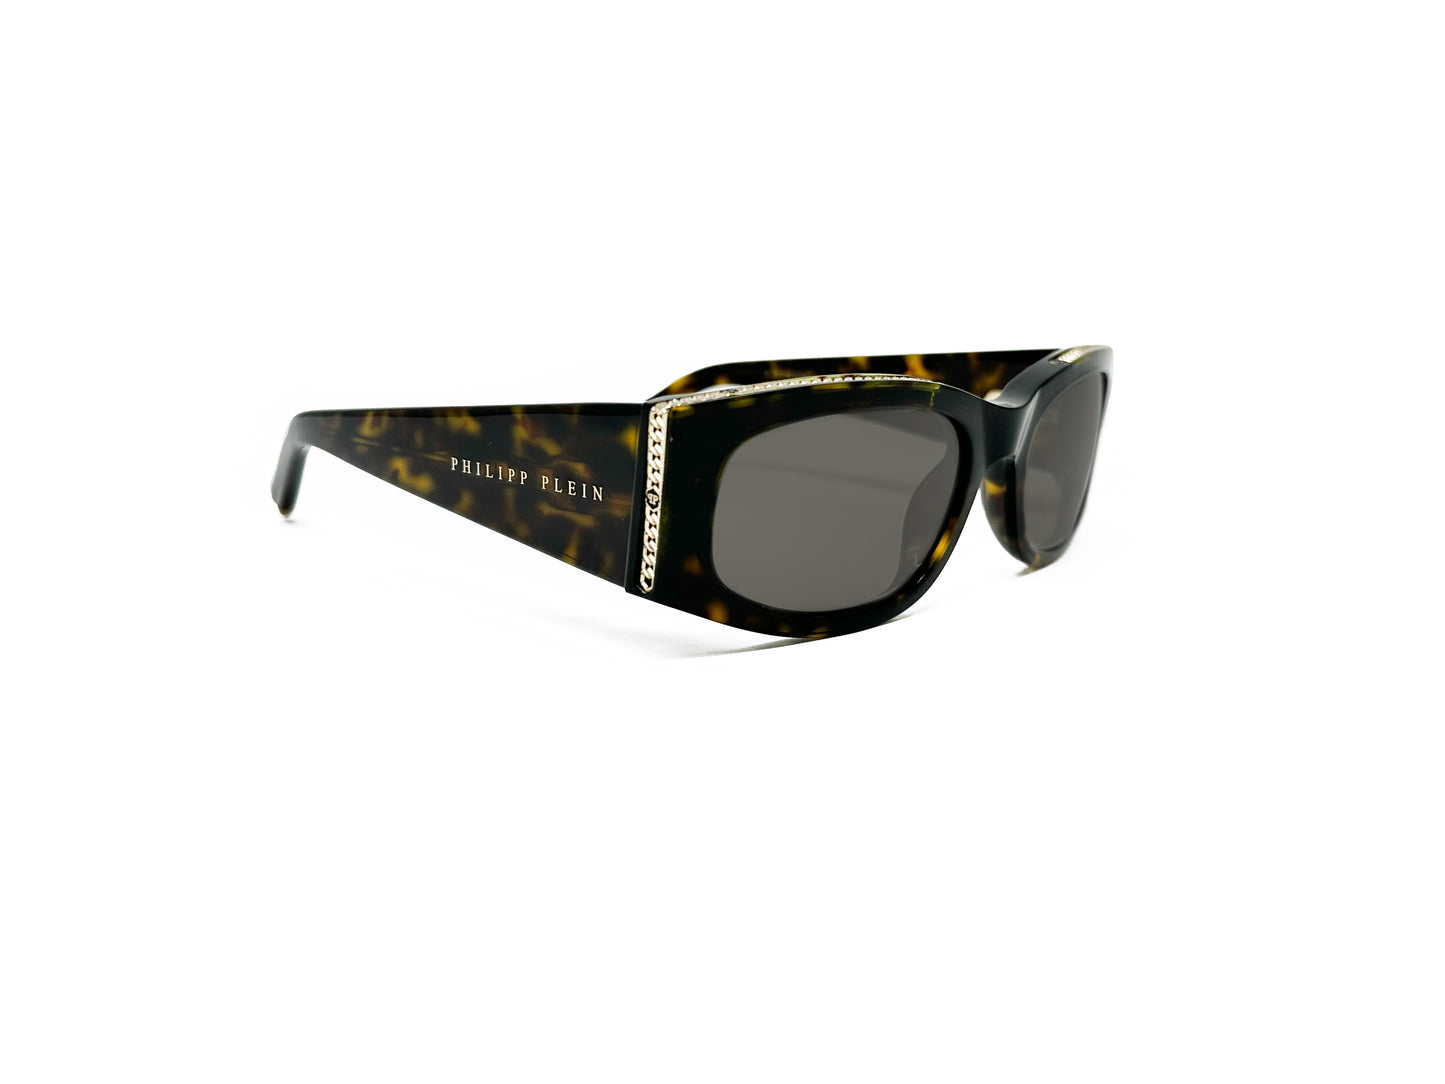 Philipp Plein curved, rectangular, acetate sunglass with an upswept lift and straight sides. Model: Nobile Rome. Color: 0722 Tortoise. Side view.